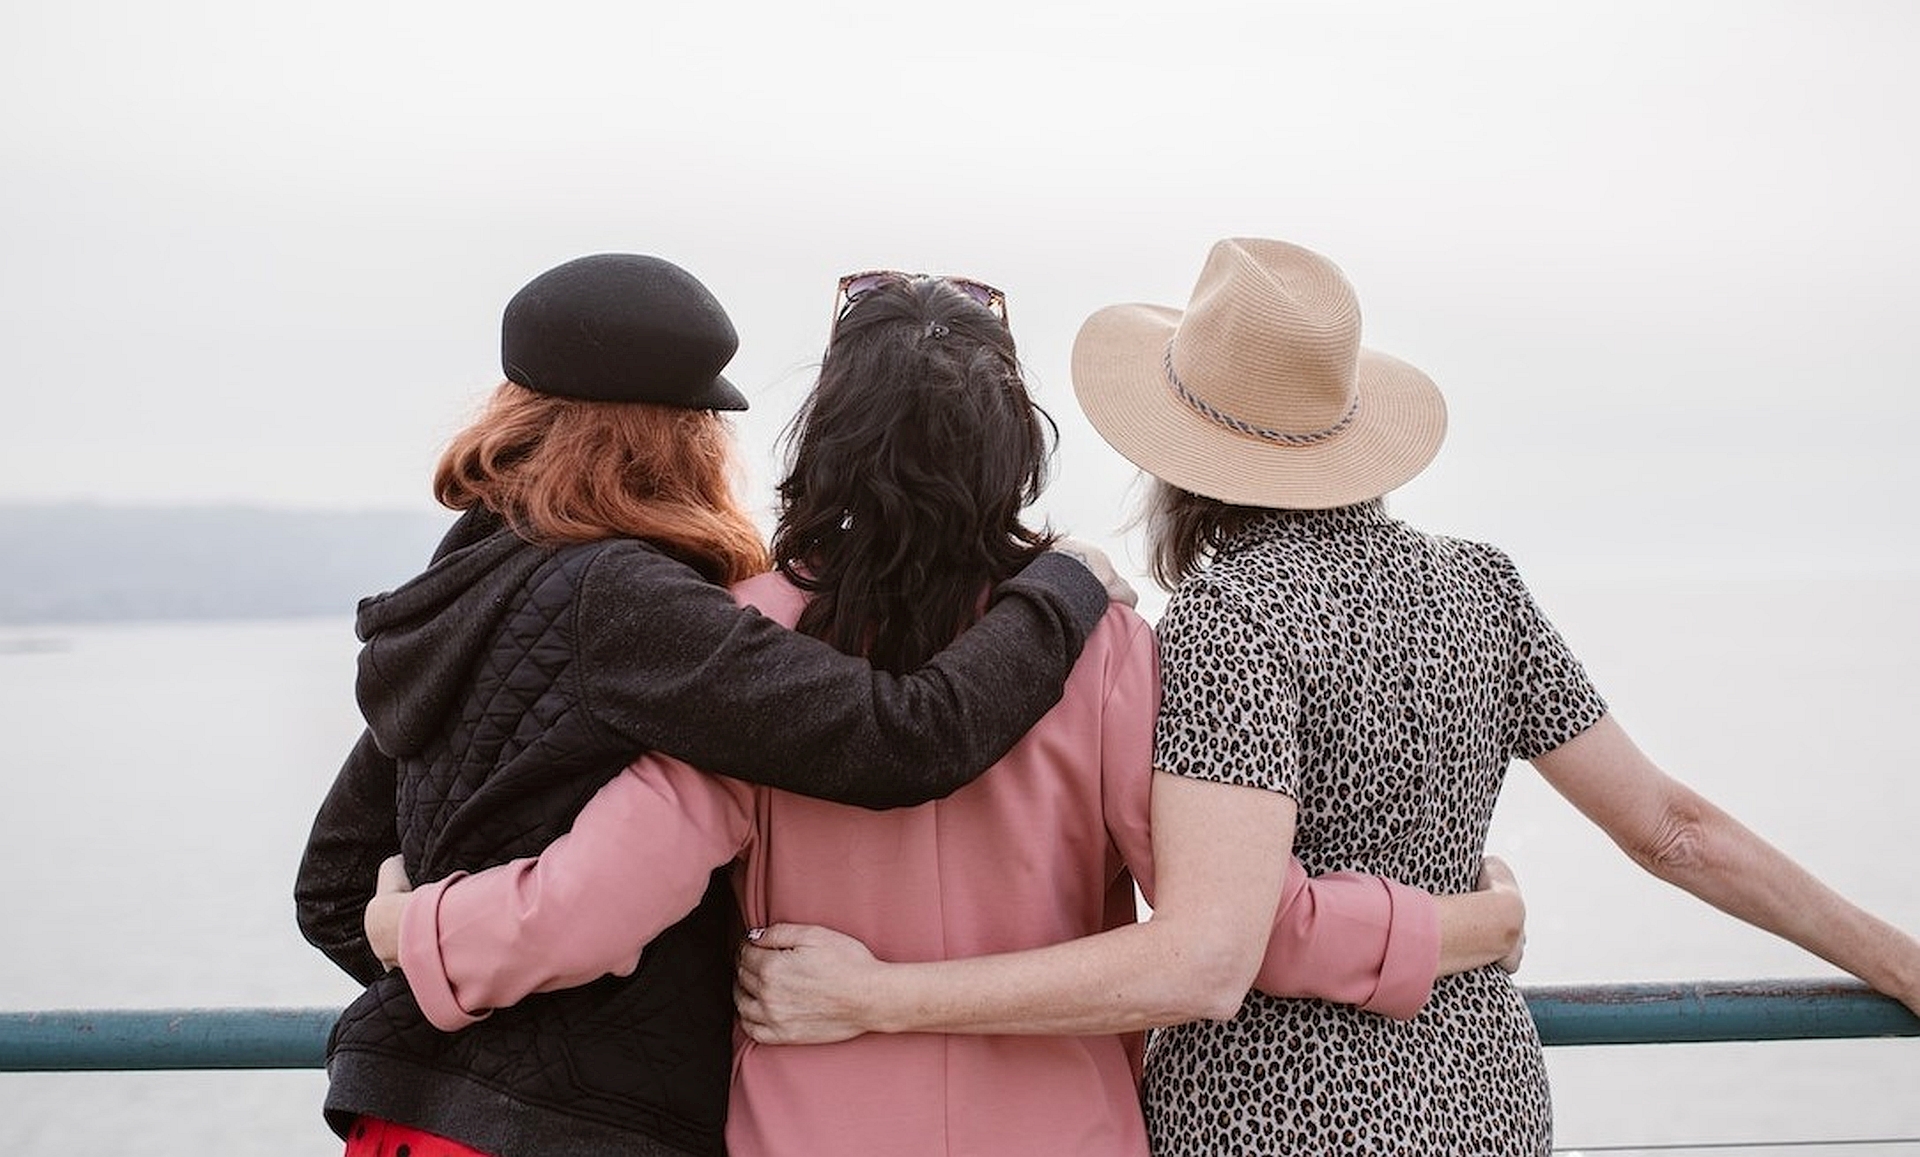 Three women with their backs to the viewer, look out to sea. They have their arms around each other.